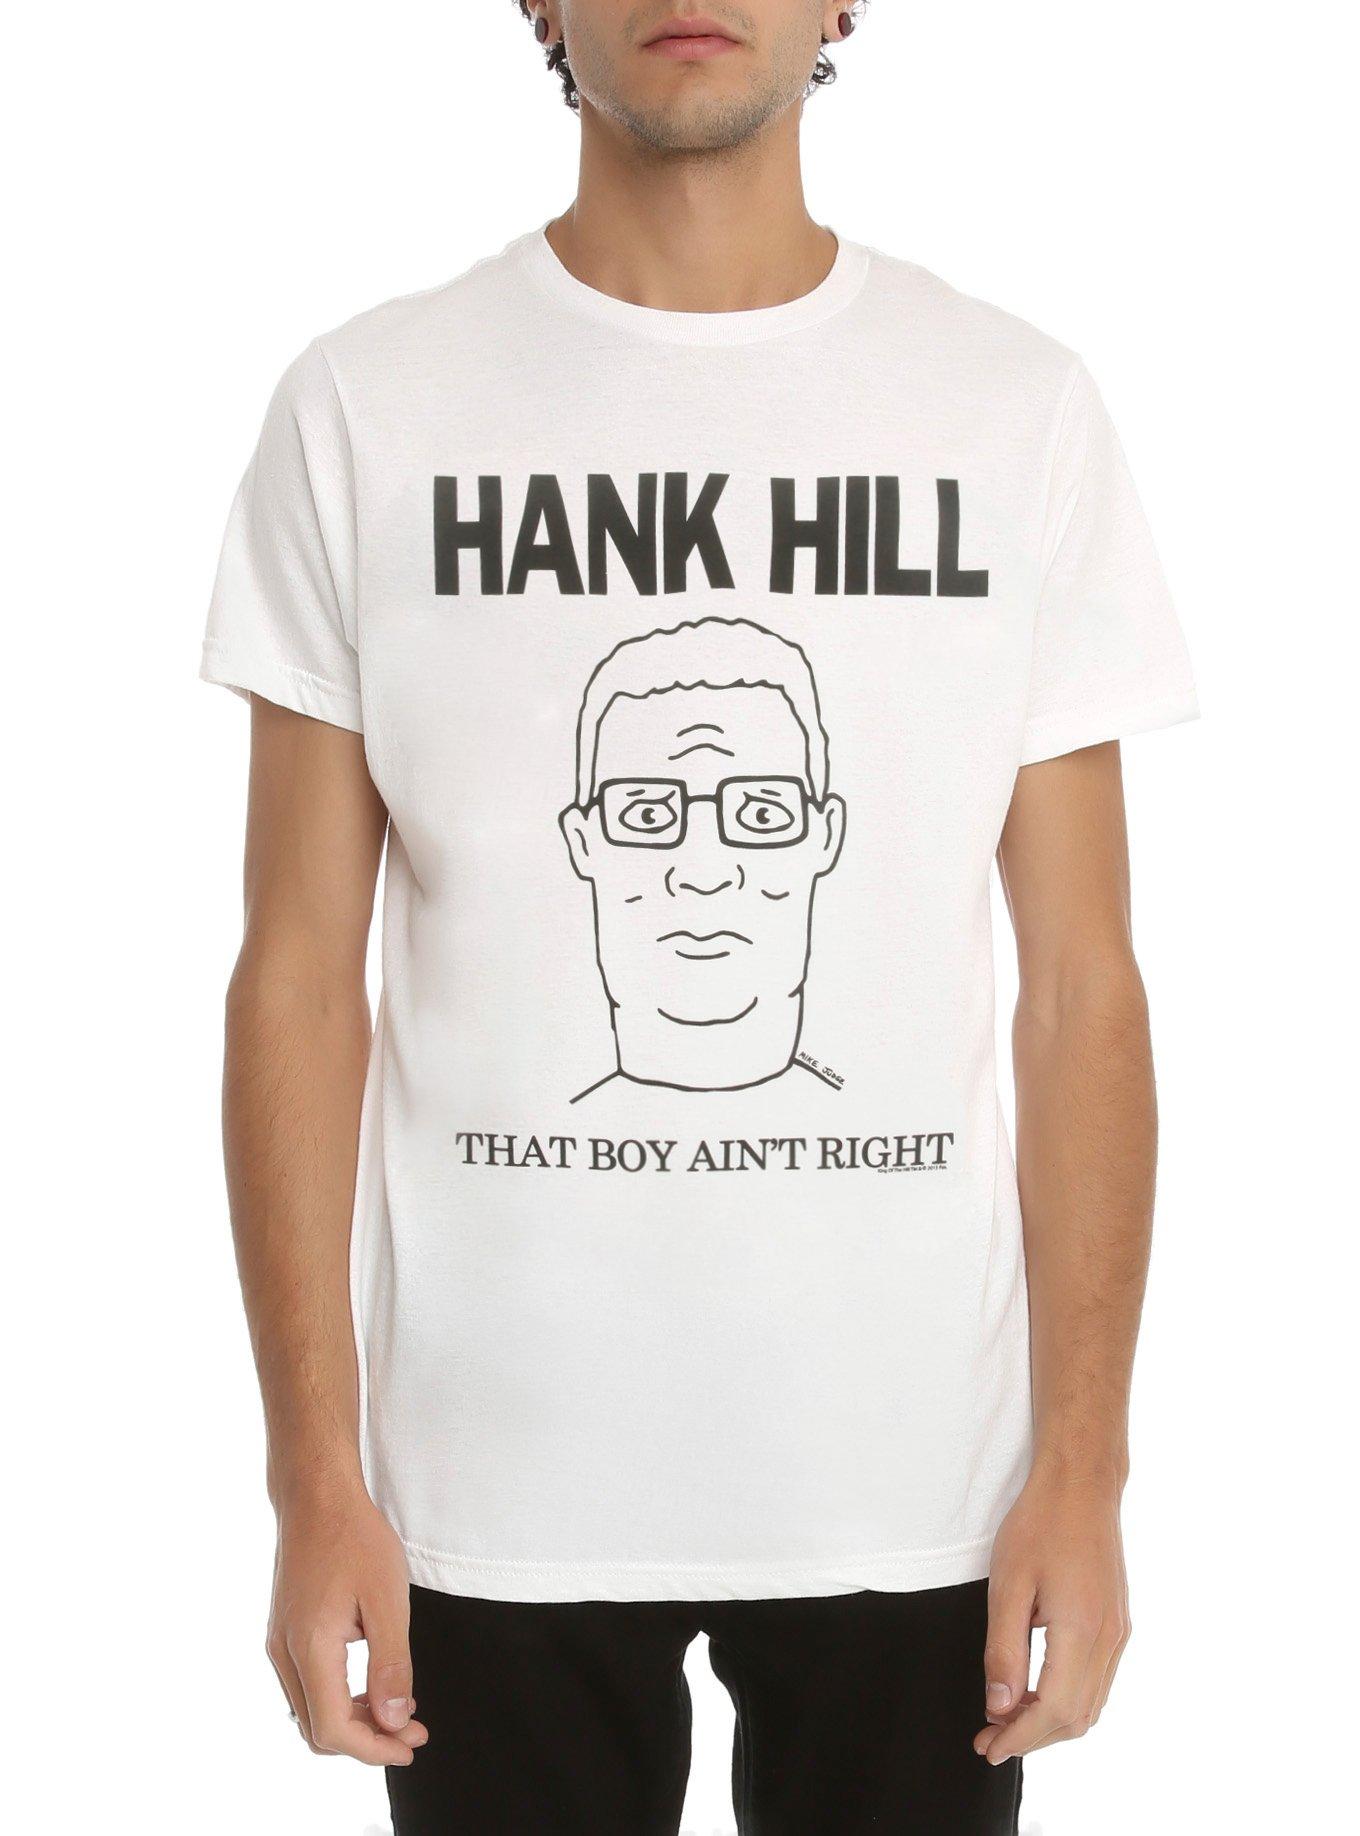 Topic · King of the hill ·